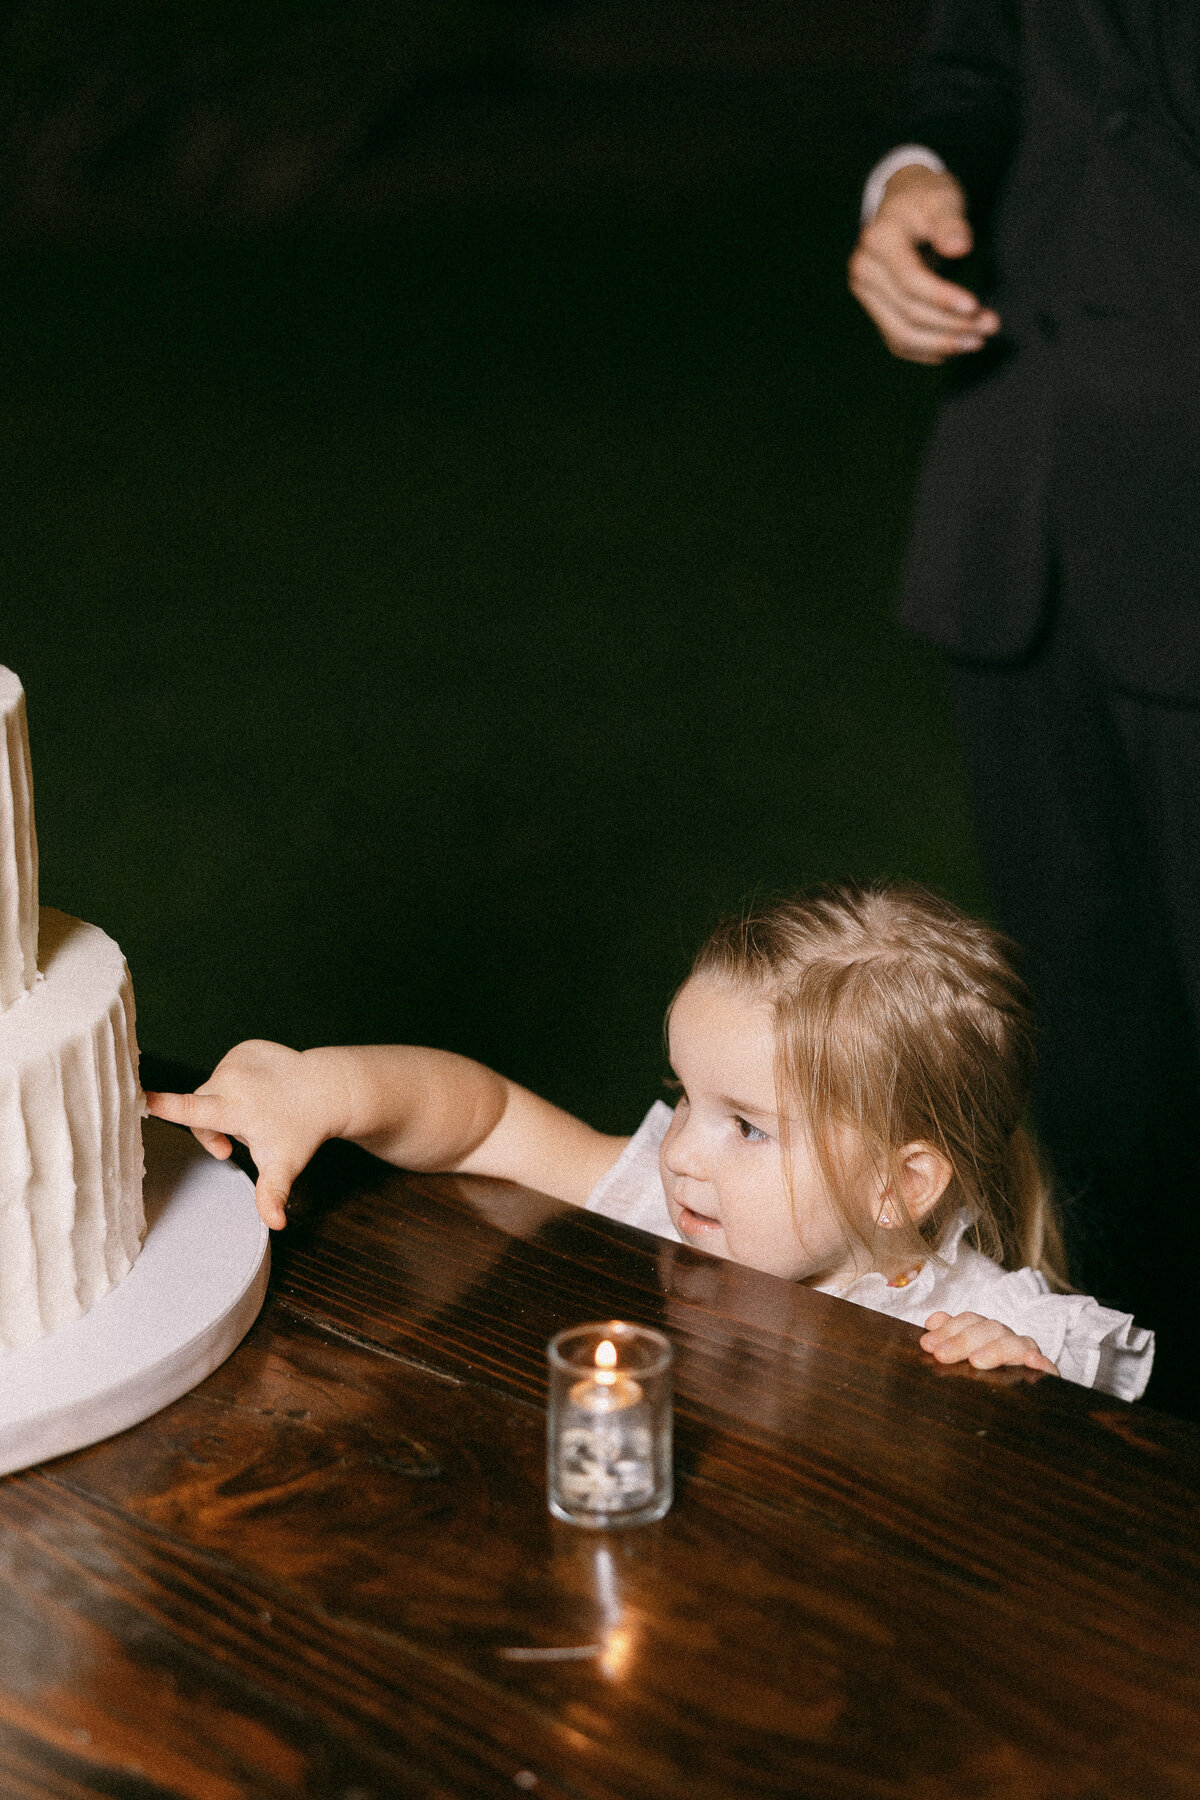 A child reaching her hand out to touch a wedding cake.